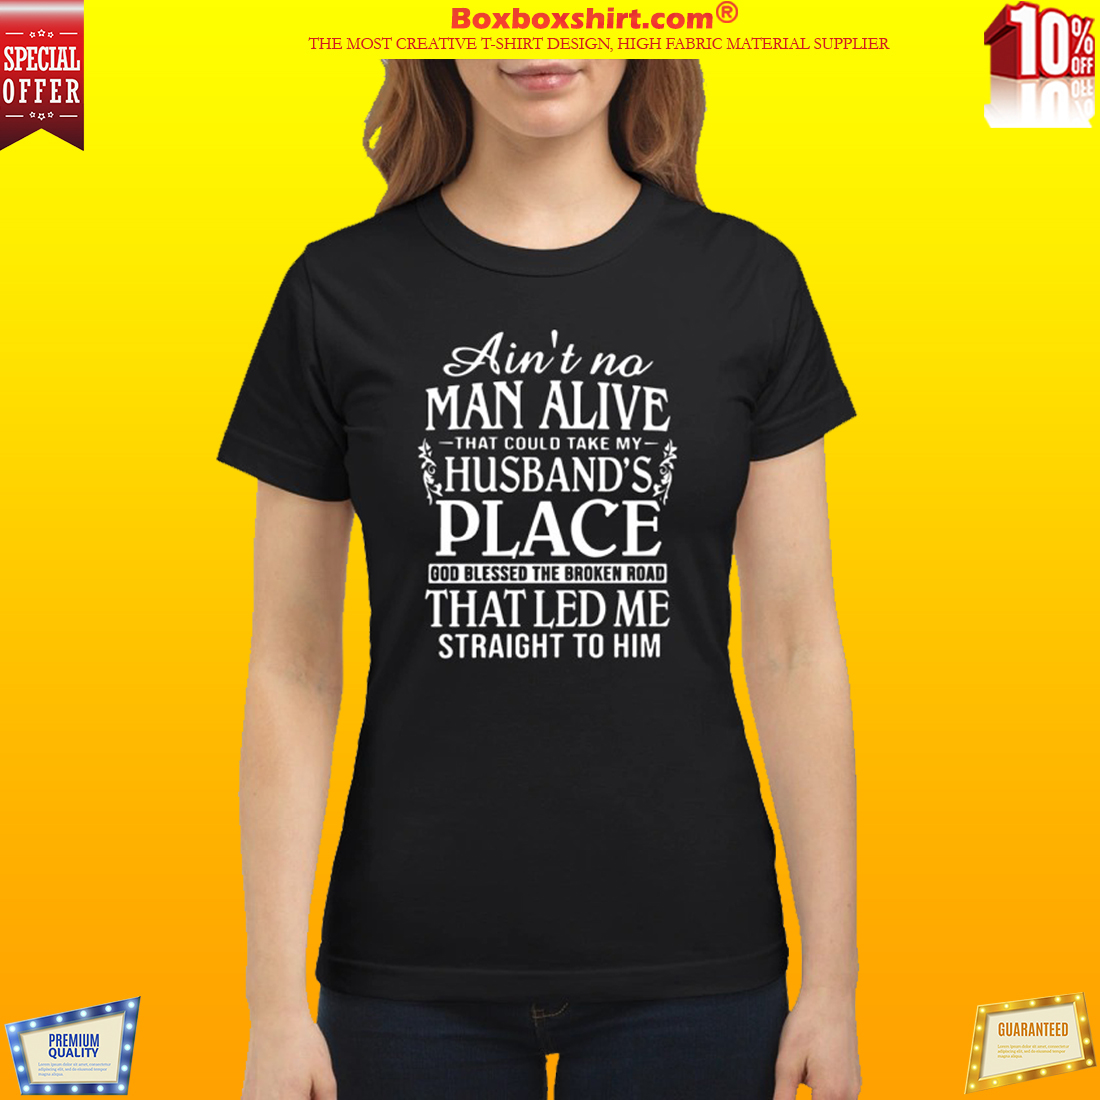 Ain't no man alive take my husband place that led me straight to him shirt